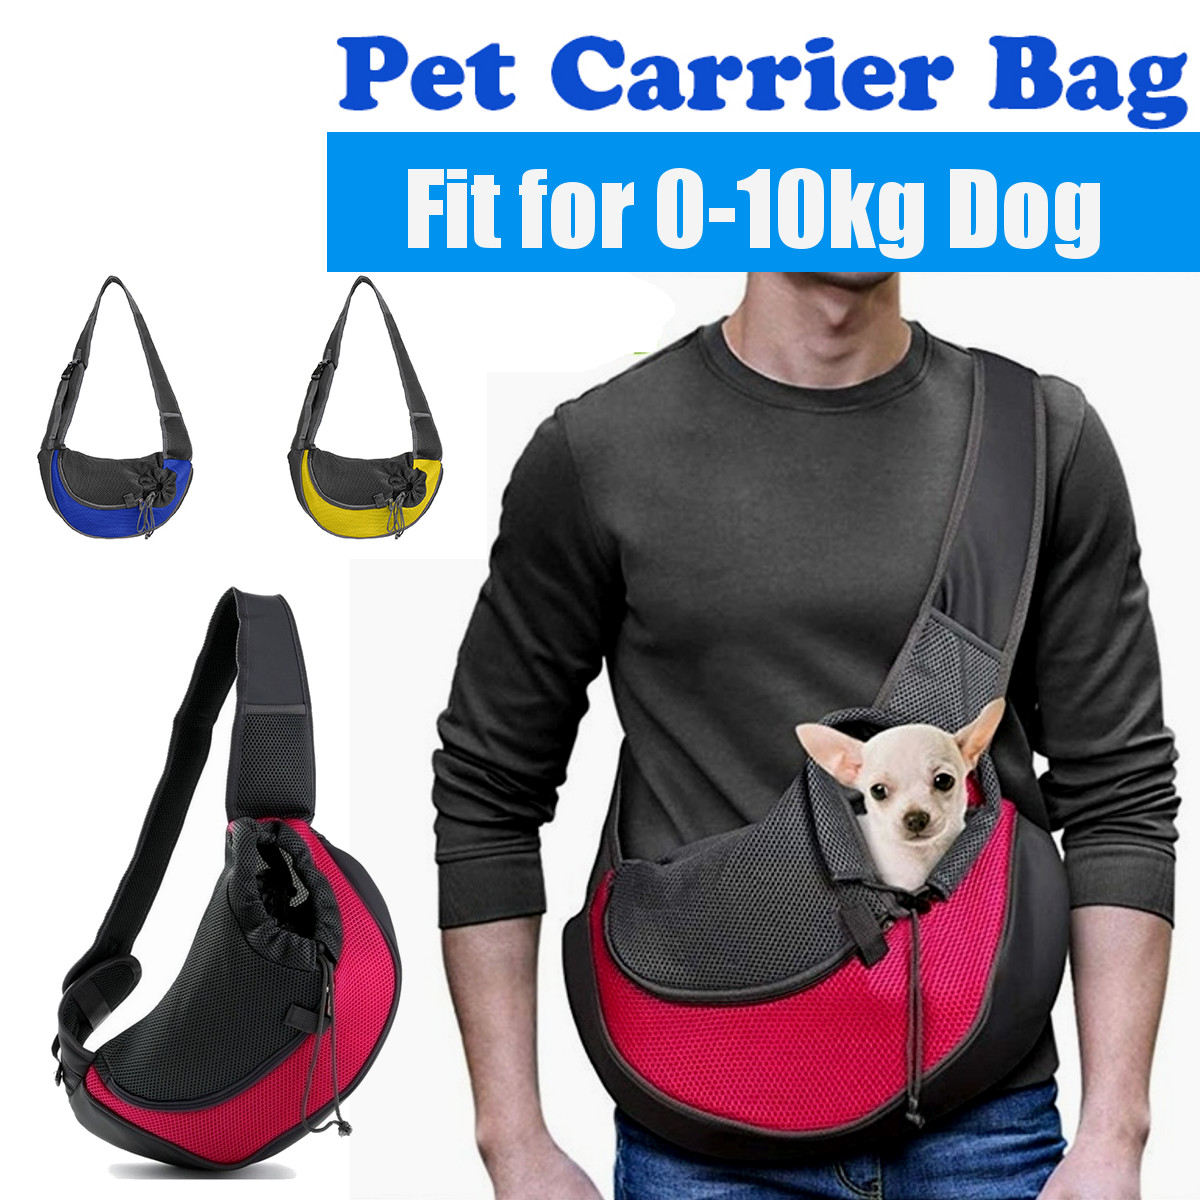 Outdoor-Breathable-Pet-Puppy-Dog-Carry-Shoulder-Carrier-Bag-with-Mobile-Phone-Storage-Pack-1877191-1